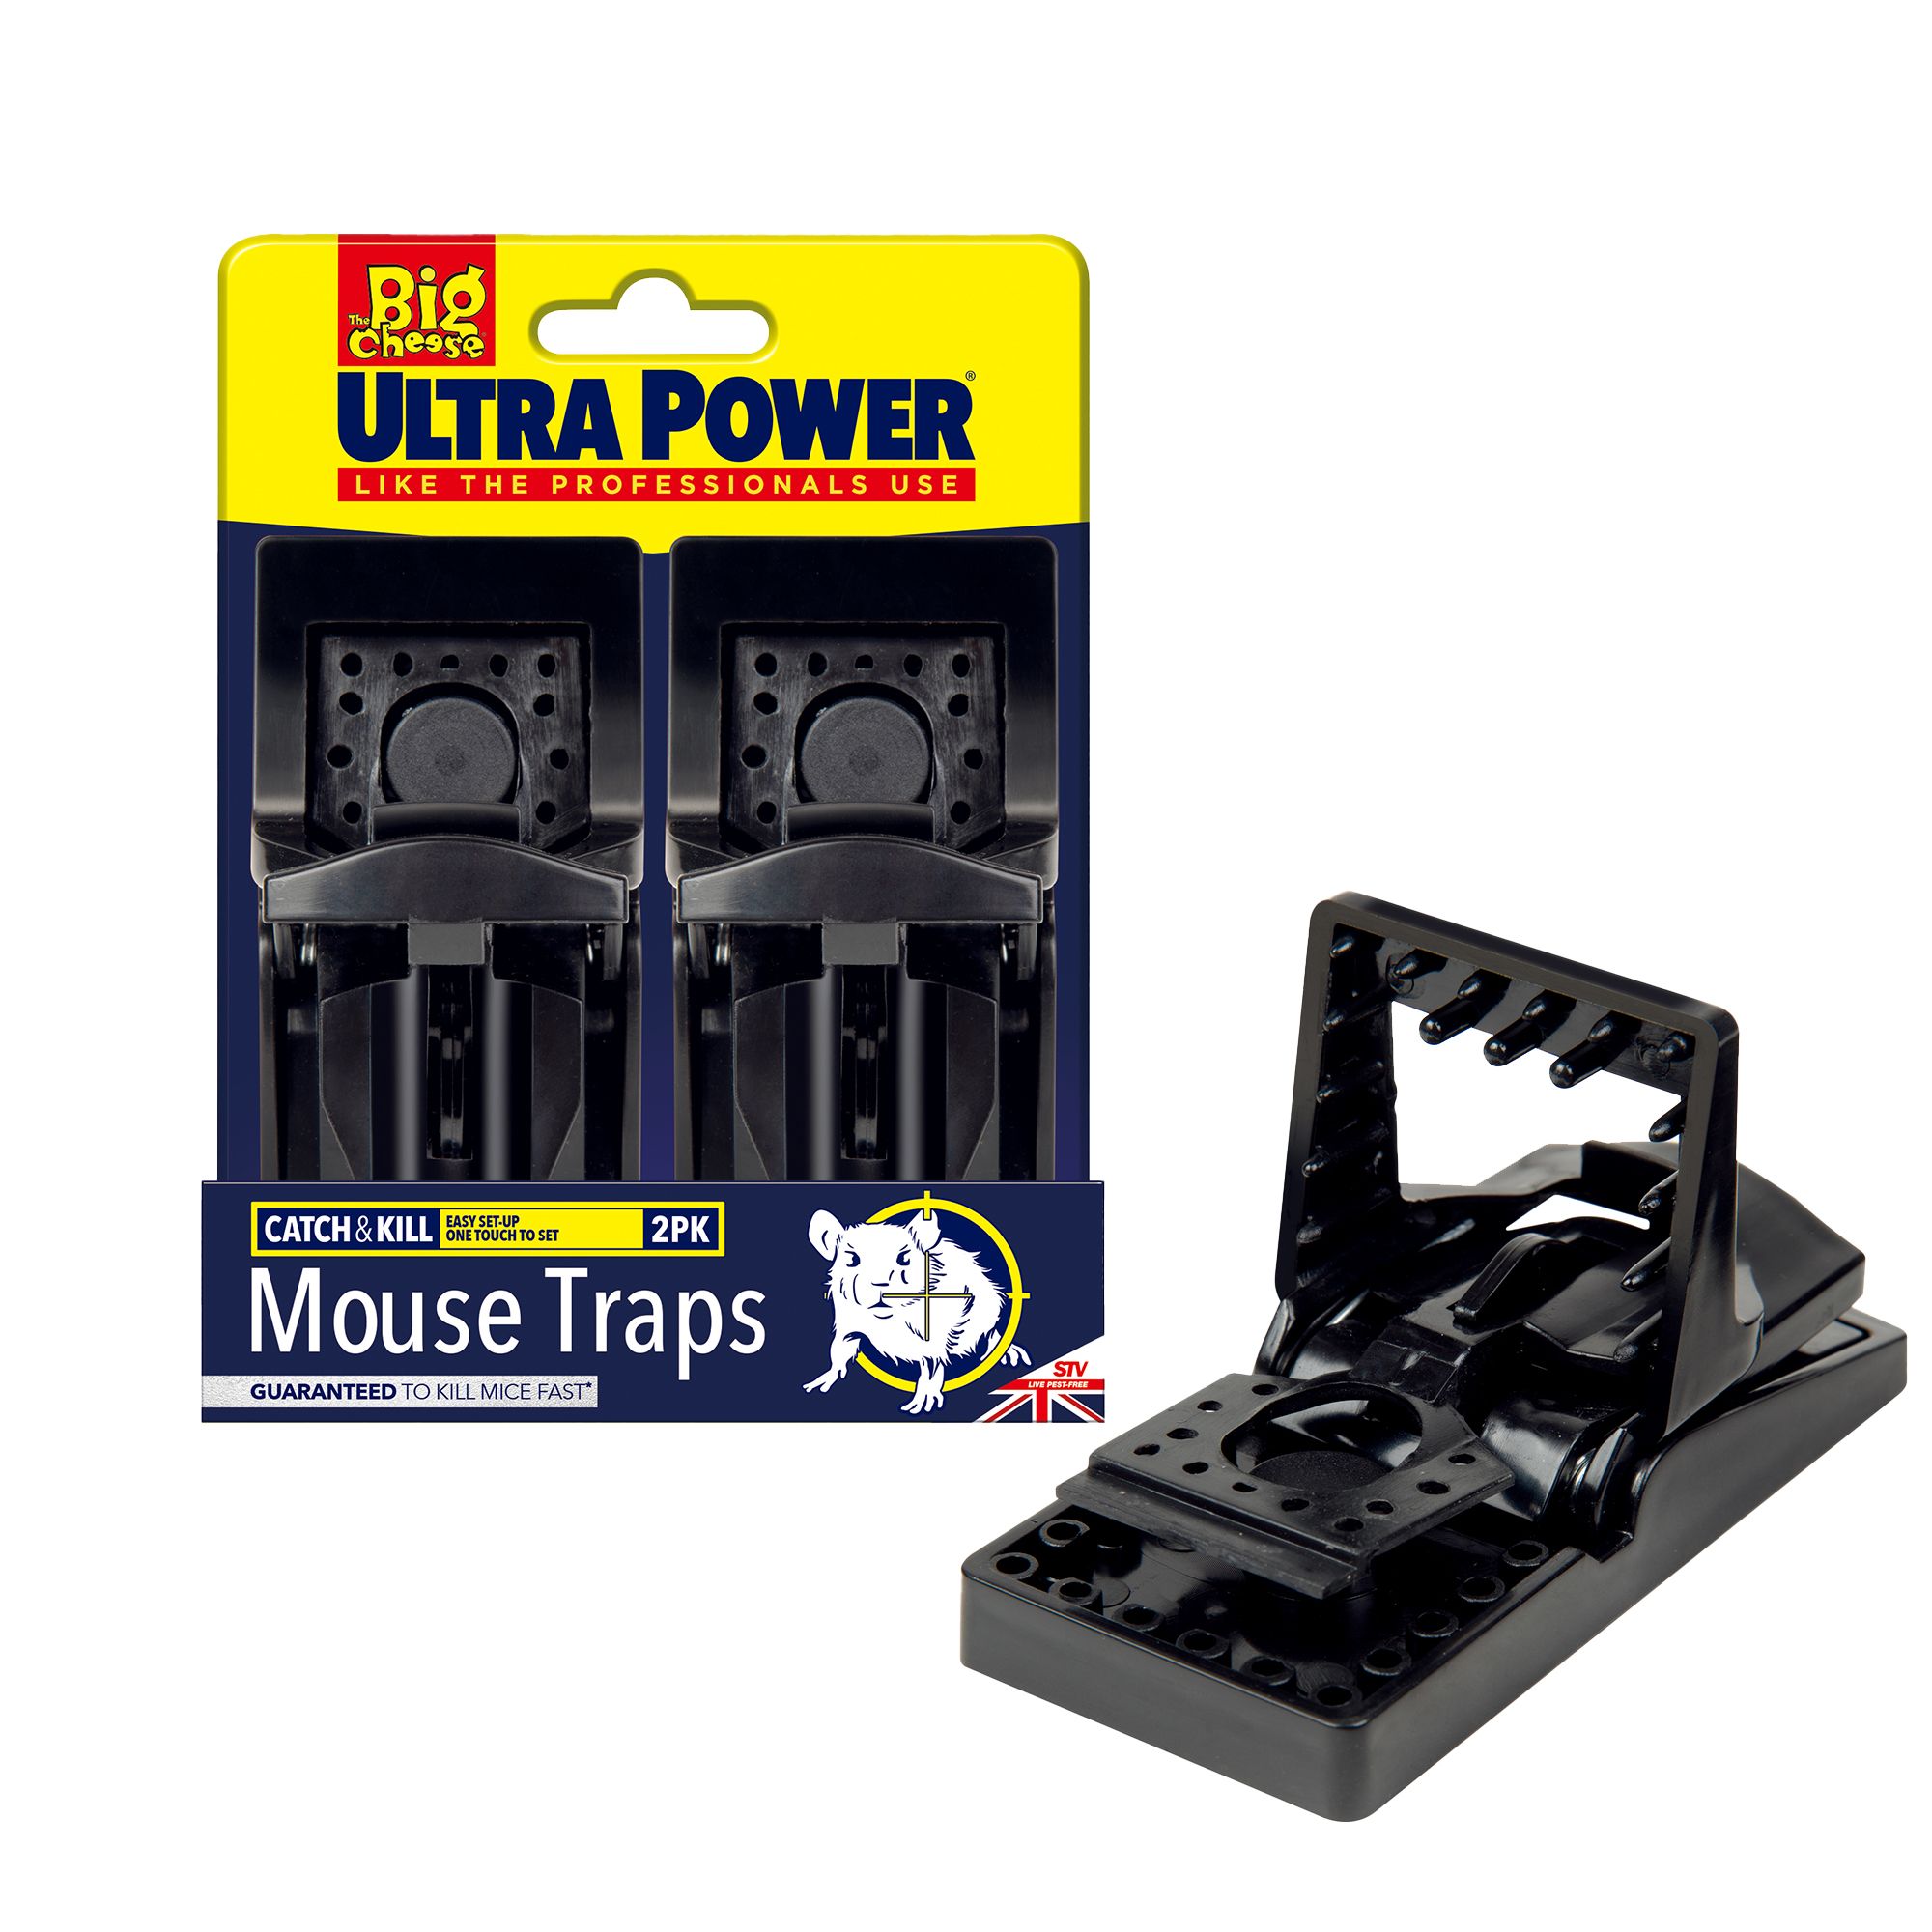 The Big Cheese Ultra Power Mouse trap, Pack of 2 (H)800mm (W)650mm